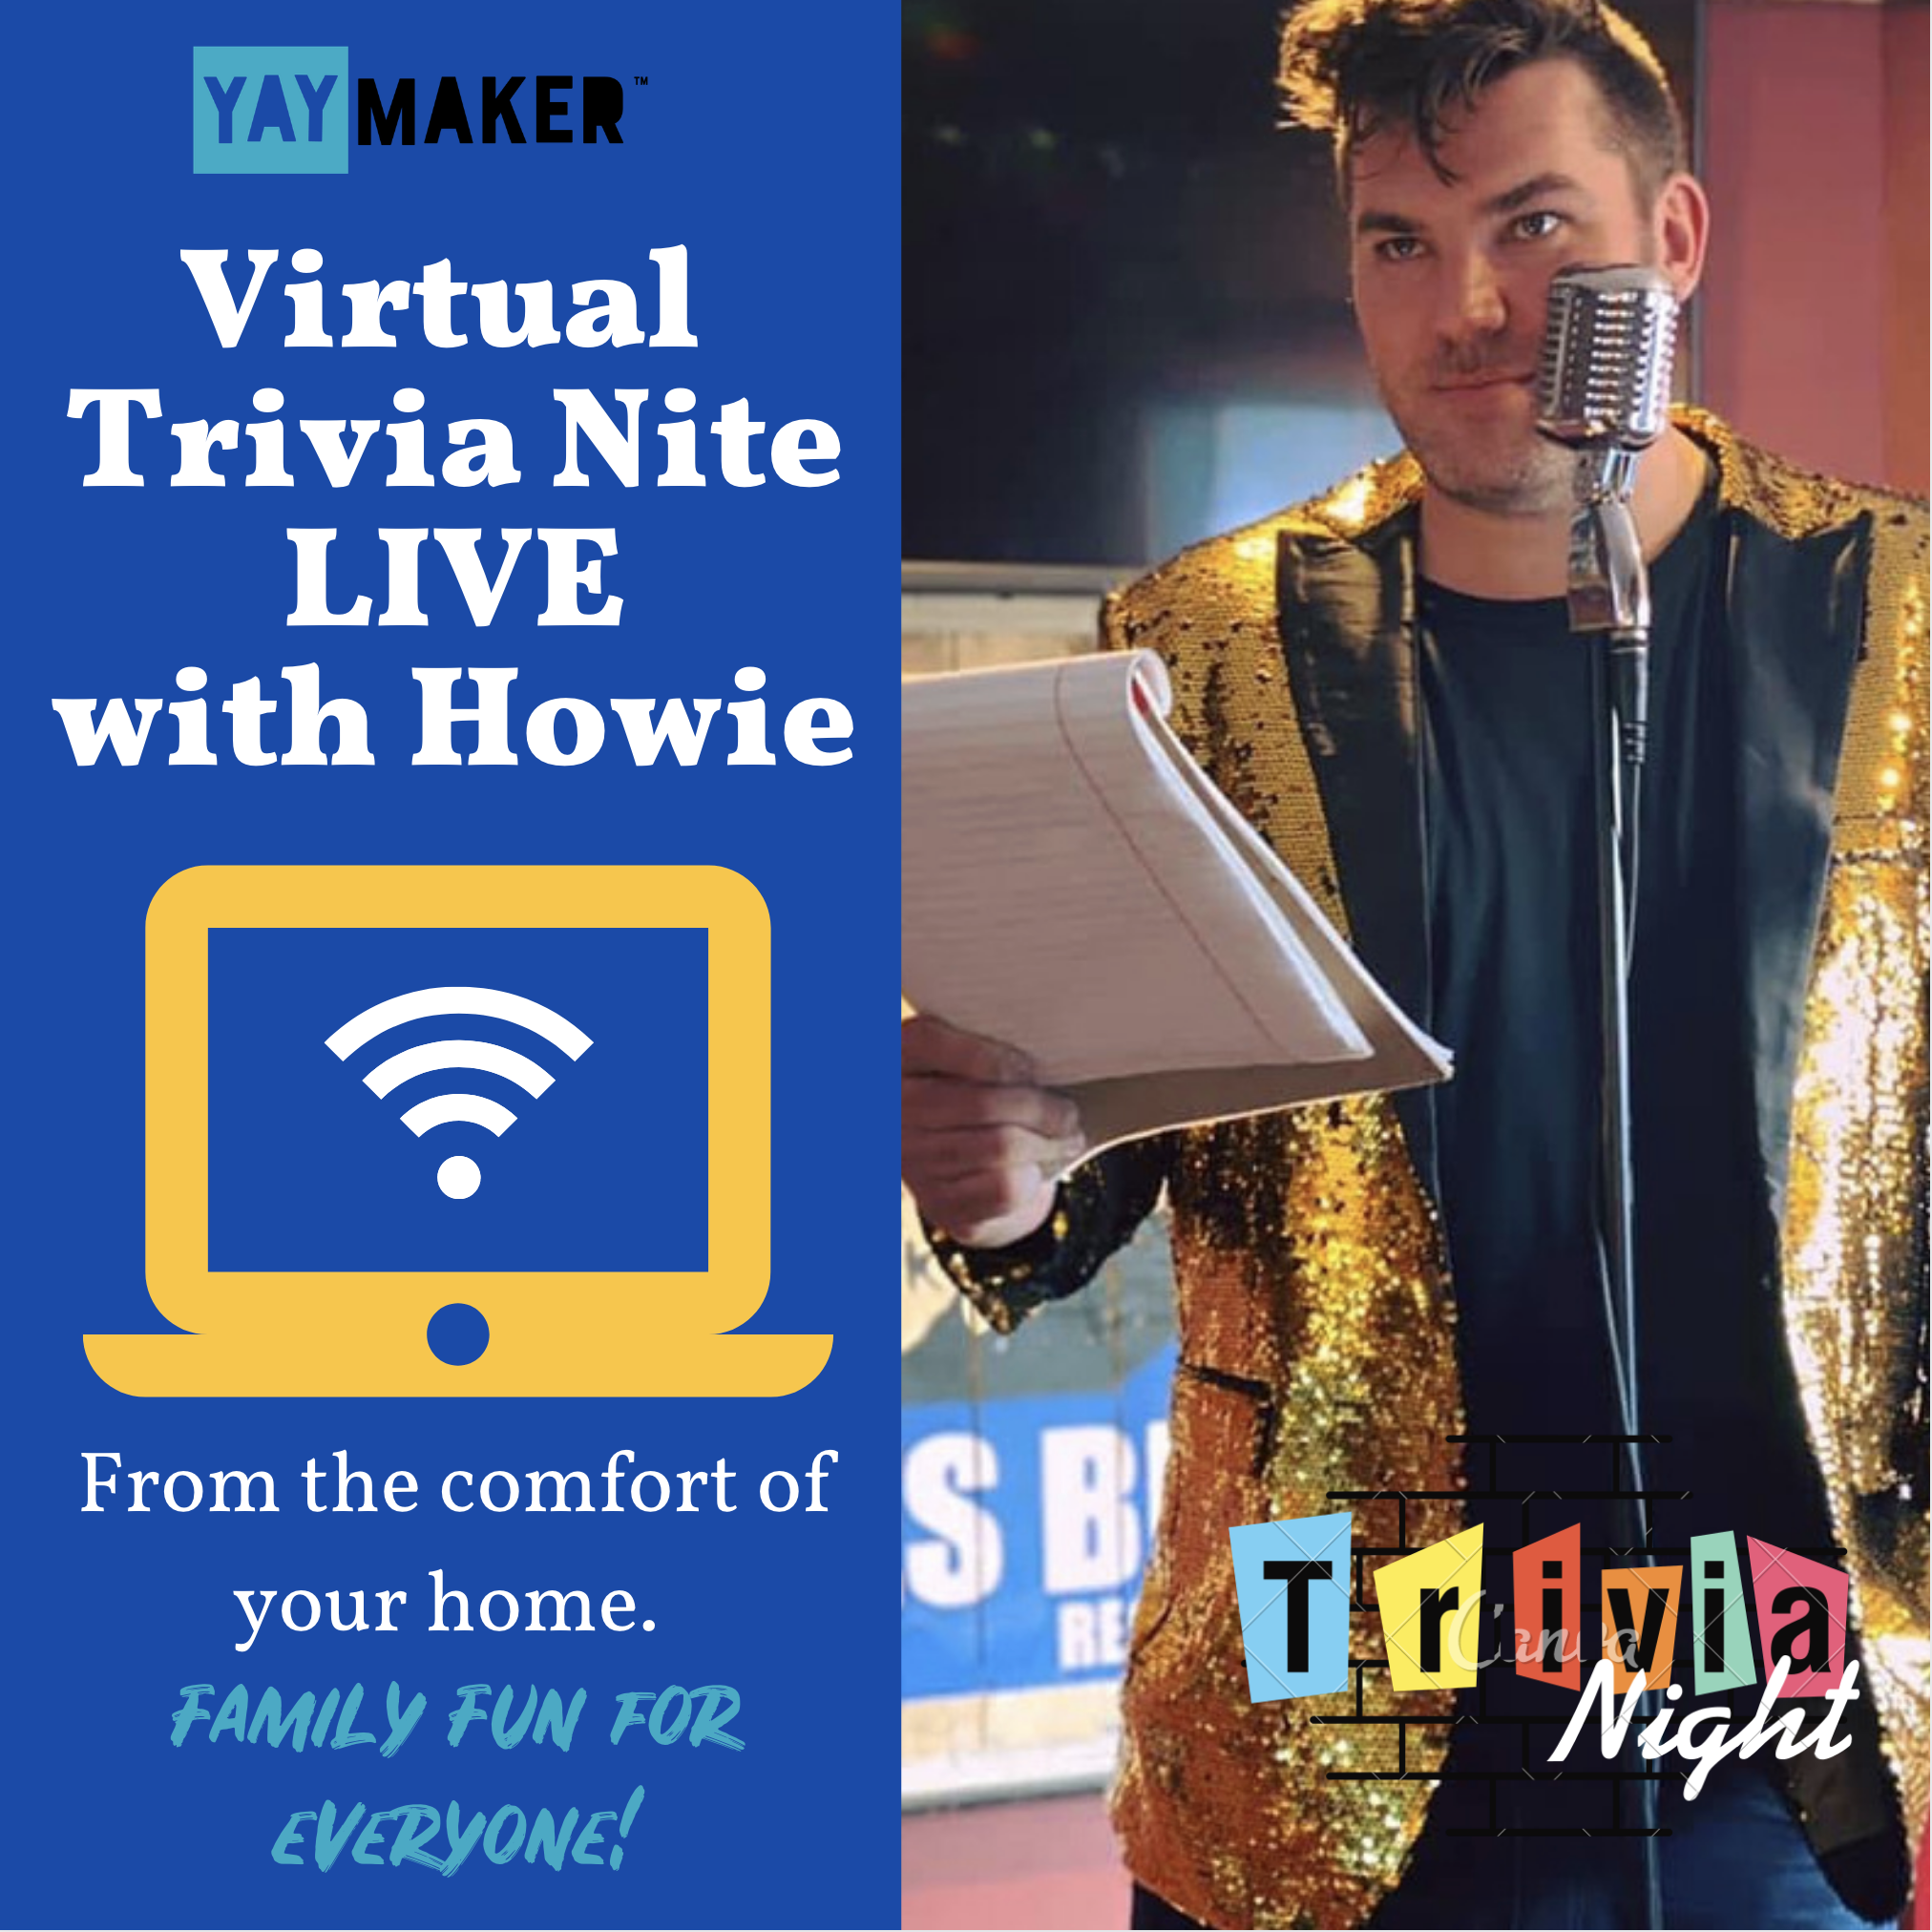 A Virtual Trivia Nite LIVE with Howie experience project by Yaymaker